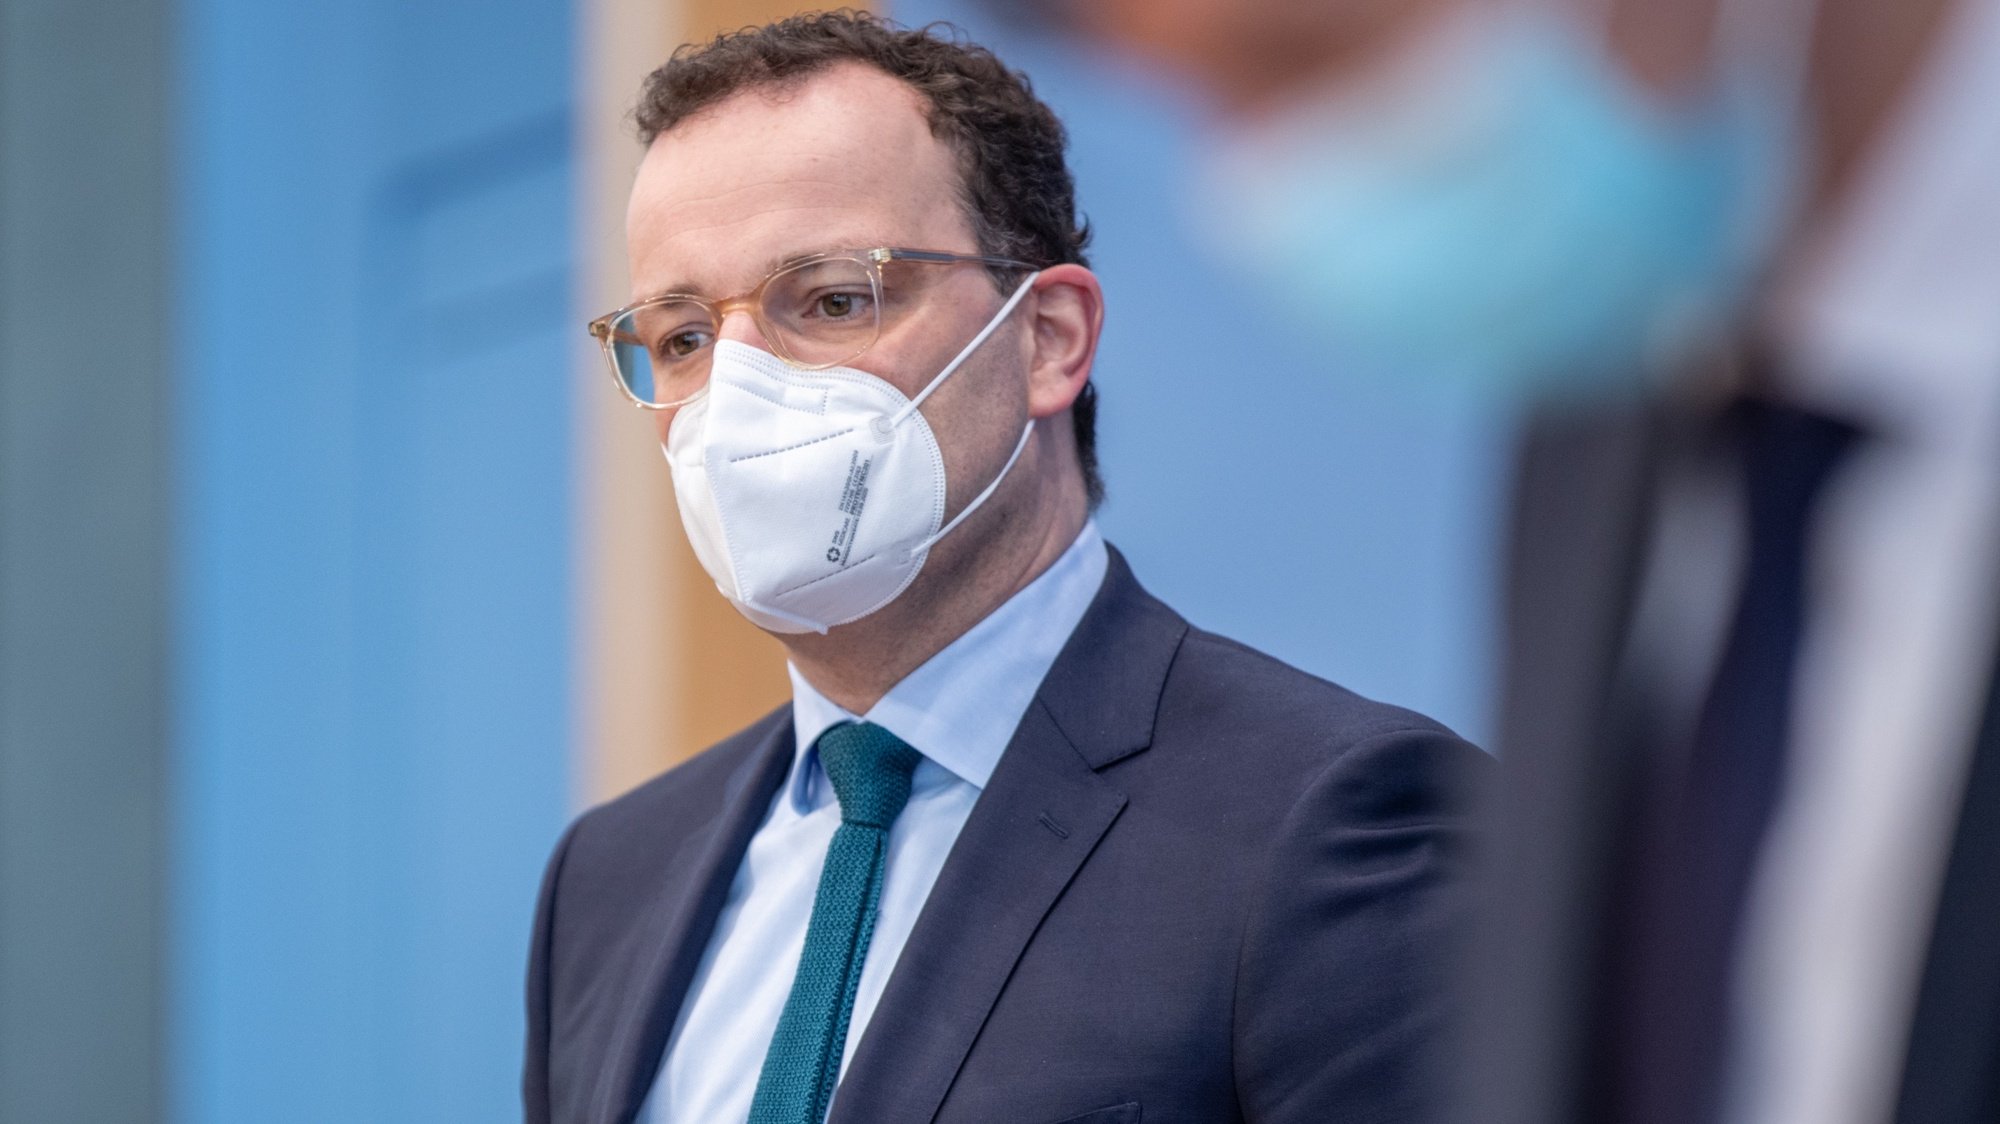 epa08957379 Jens Spahn, German Minister of Health at Federal Press Conference on pandemic Corona situation in lockdown in Berlin, Germany, 22 January 2021. According to Robert Koch Institute, the German federal agency for disease control, the number of people who died with coronavirus surpassed 50,000 in Germany since the start of the pandemic. However, number of infected people began to drop in the country, which is currently in lockdown until 14 February, with total infections of more than 2.1 million.  EPA/ANDREAS GORA / POOL